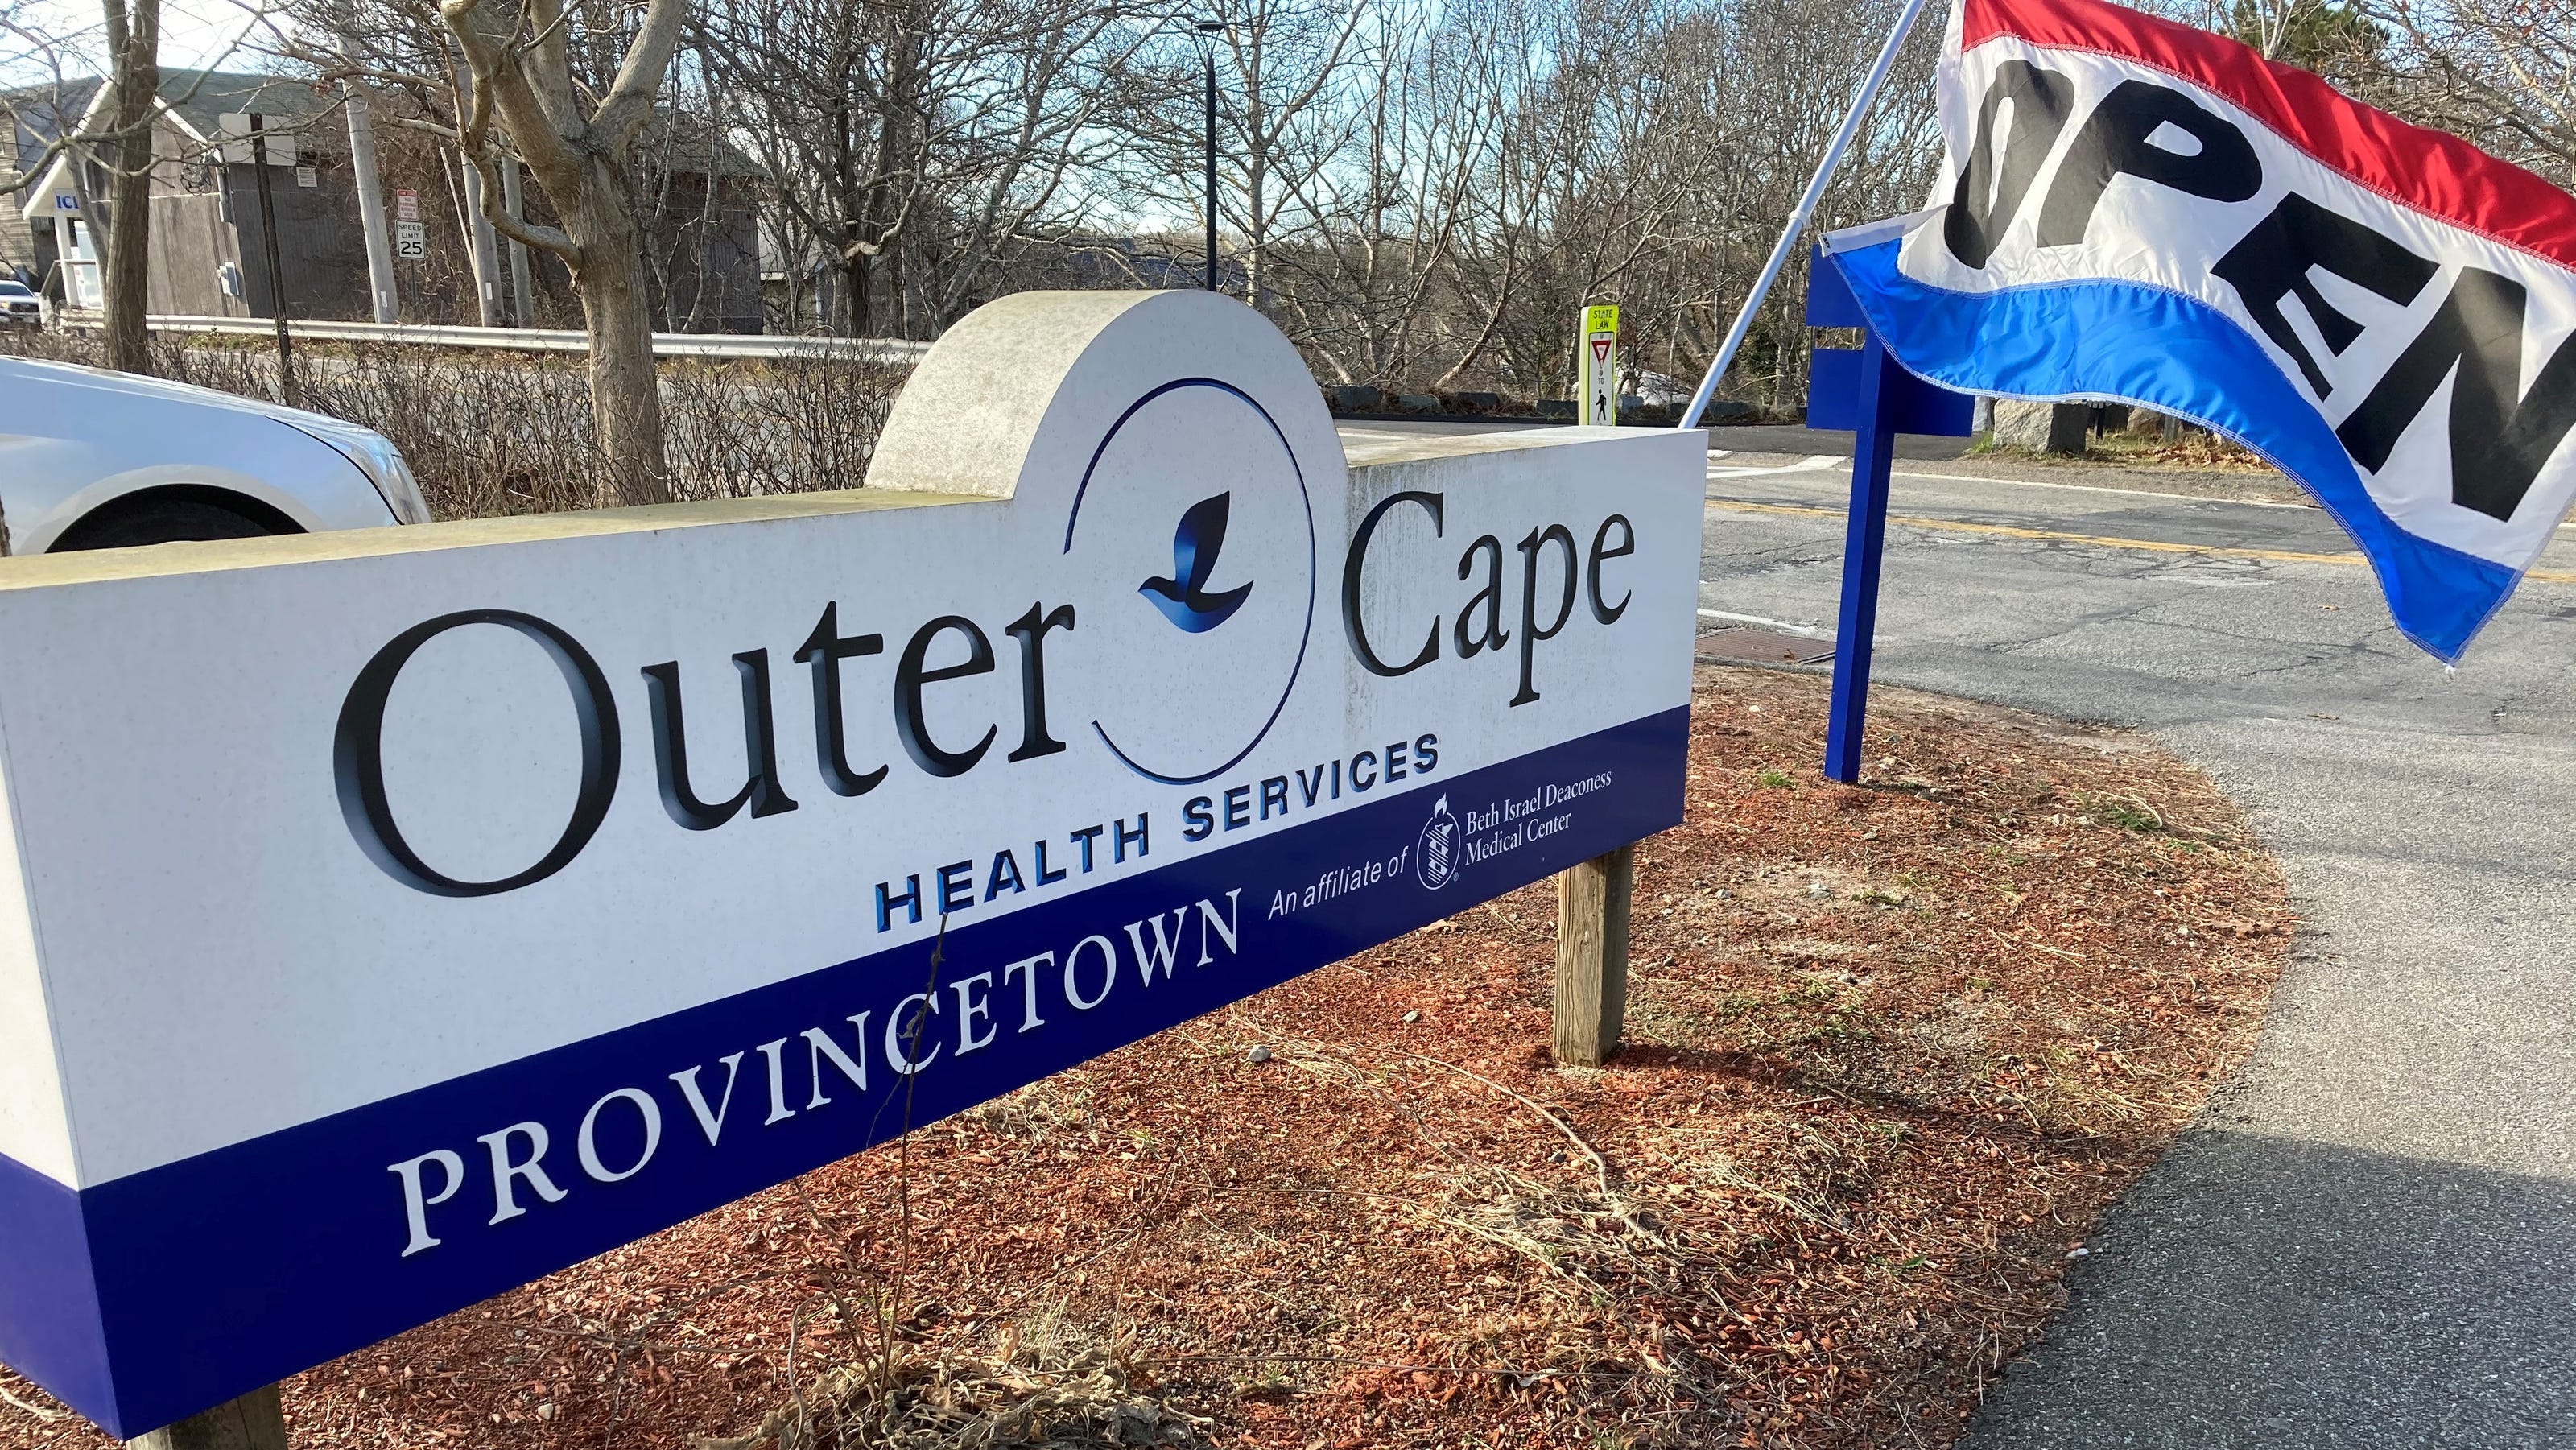 Provincetown Free Covid-19 Tests Through February At Outer Cape Health Services Offices